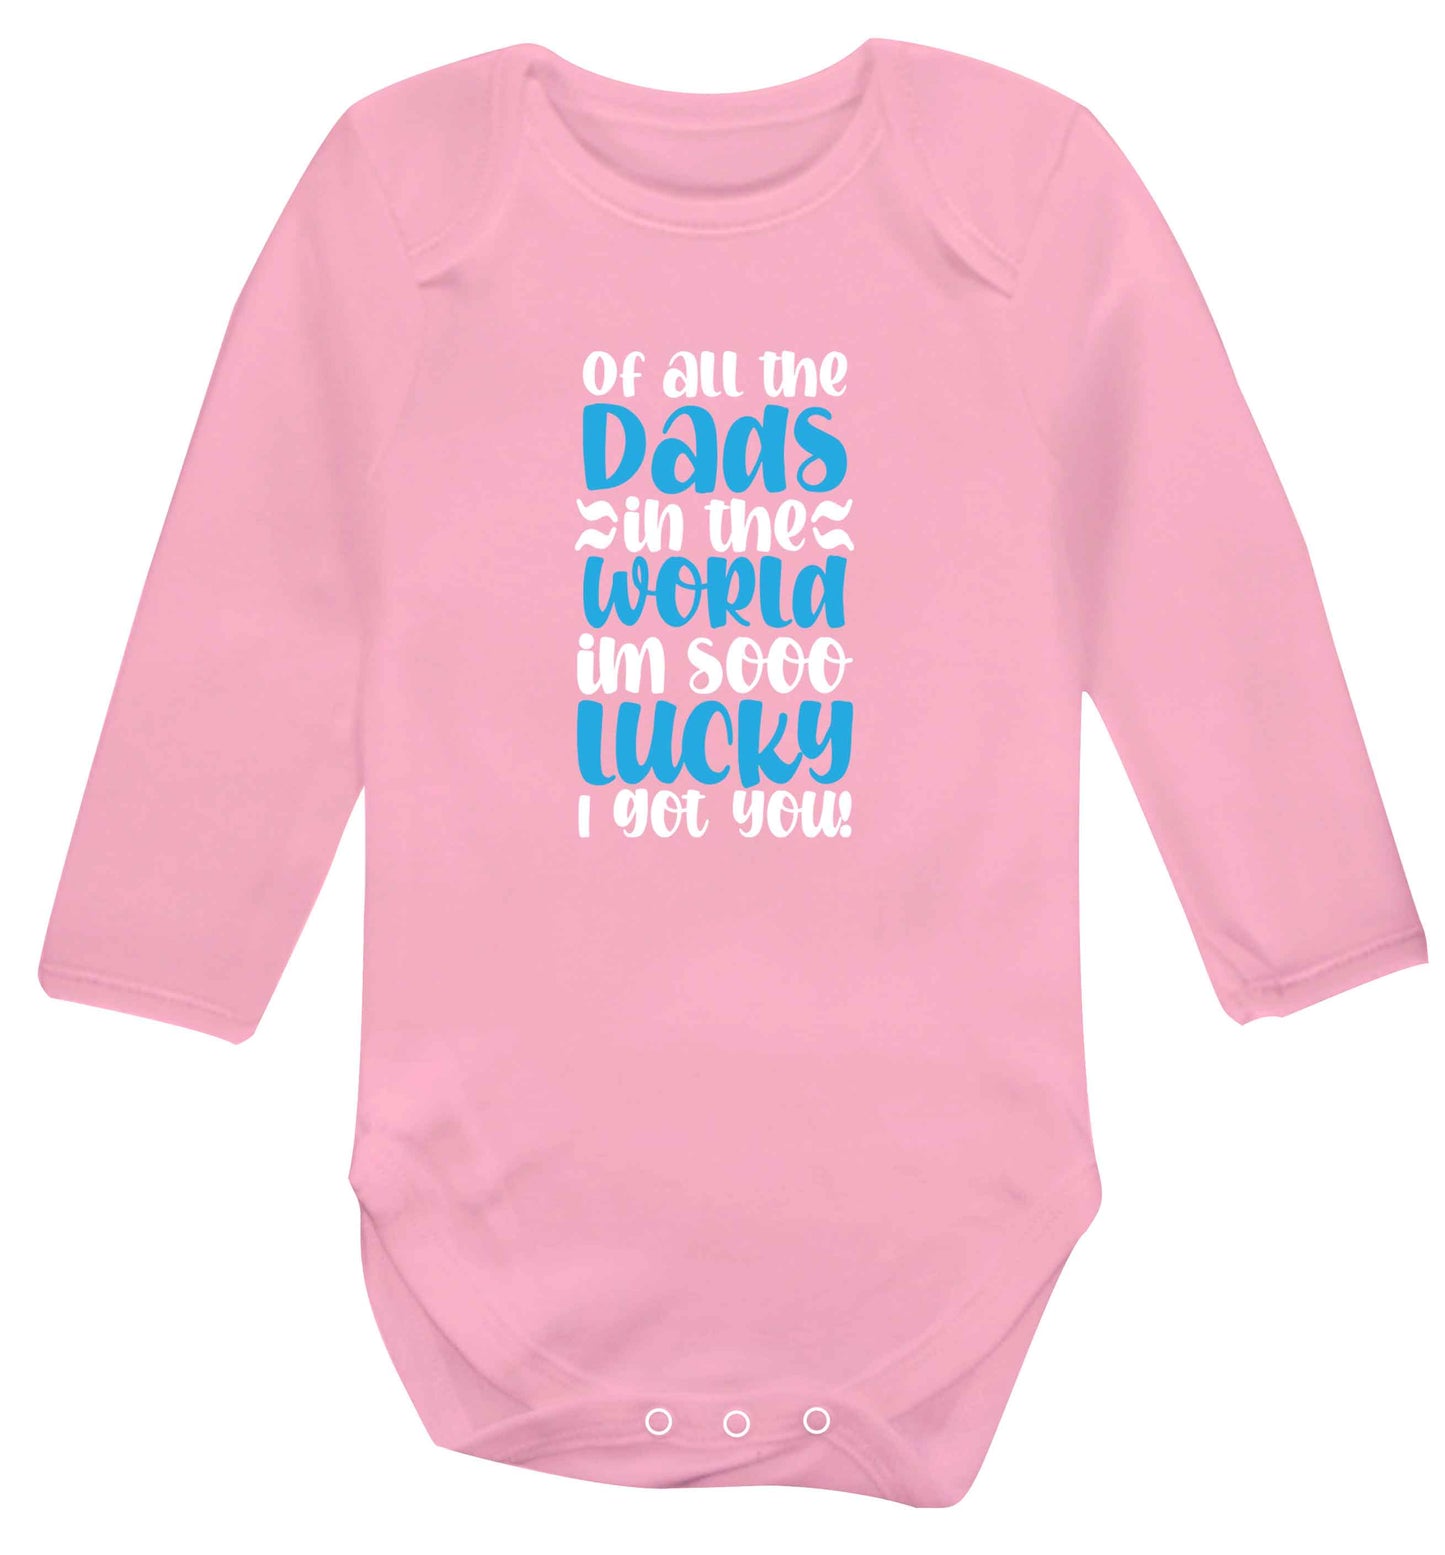 I'm as lucky as can be the worlds greatest dad belongs to me! baby vest long sleeved pale pink 6-12 months